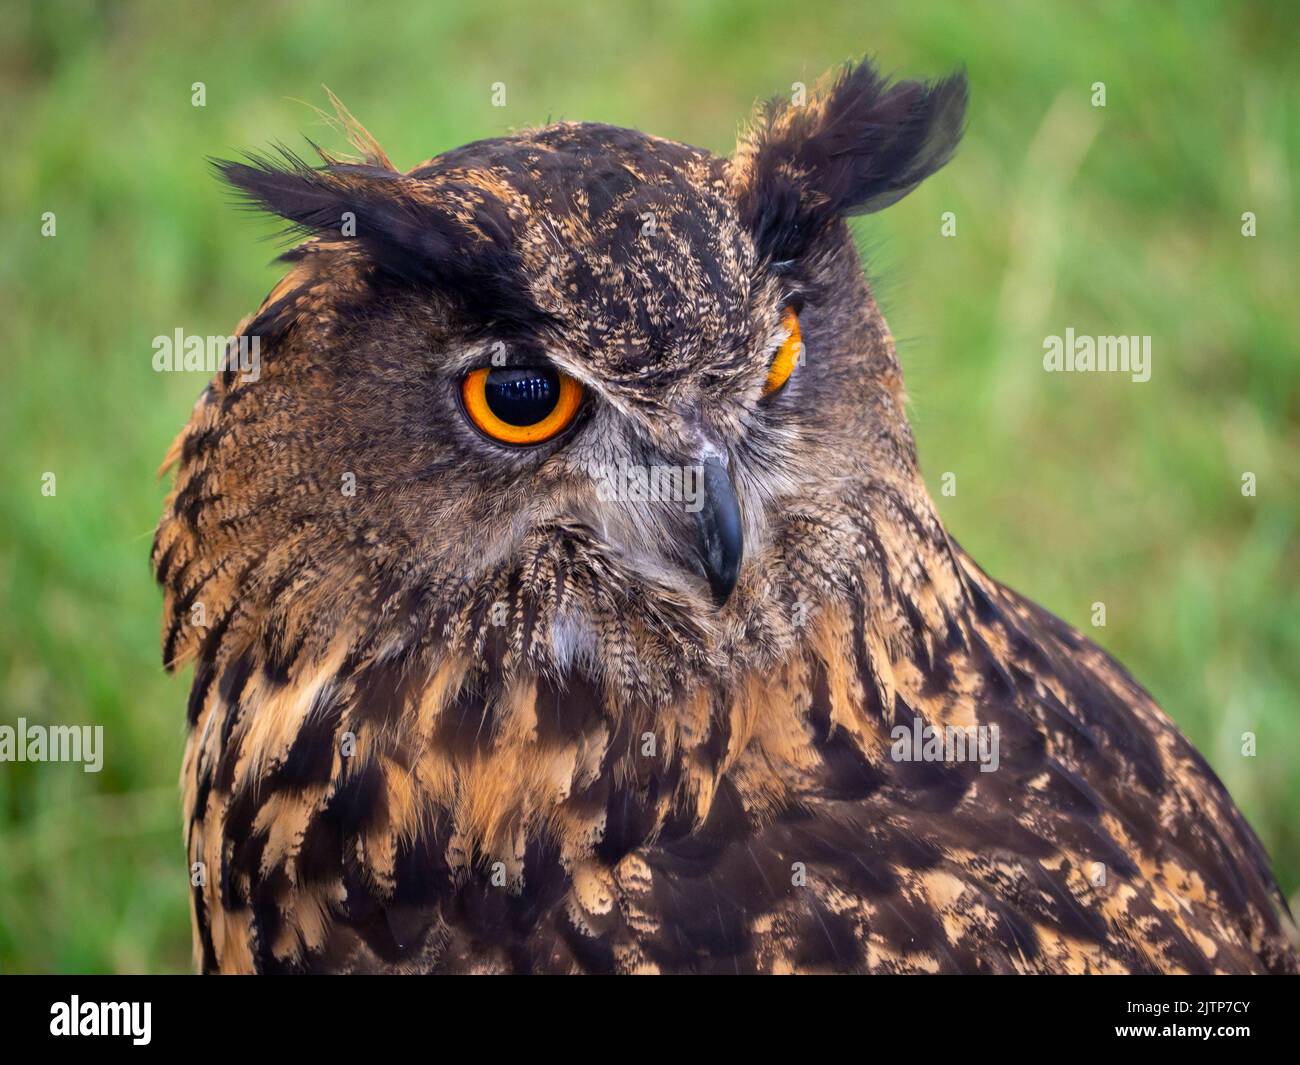 European Eagle Owl with its large orange eyes looking over its shoulder to the right Stock Photo